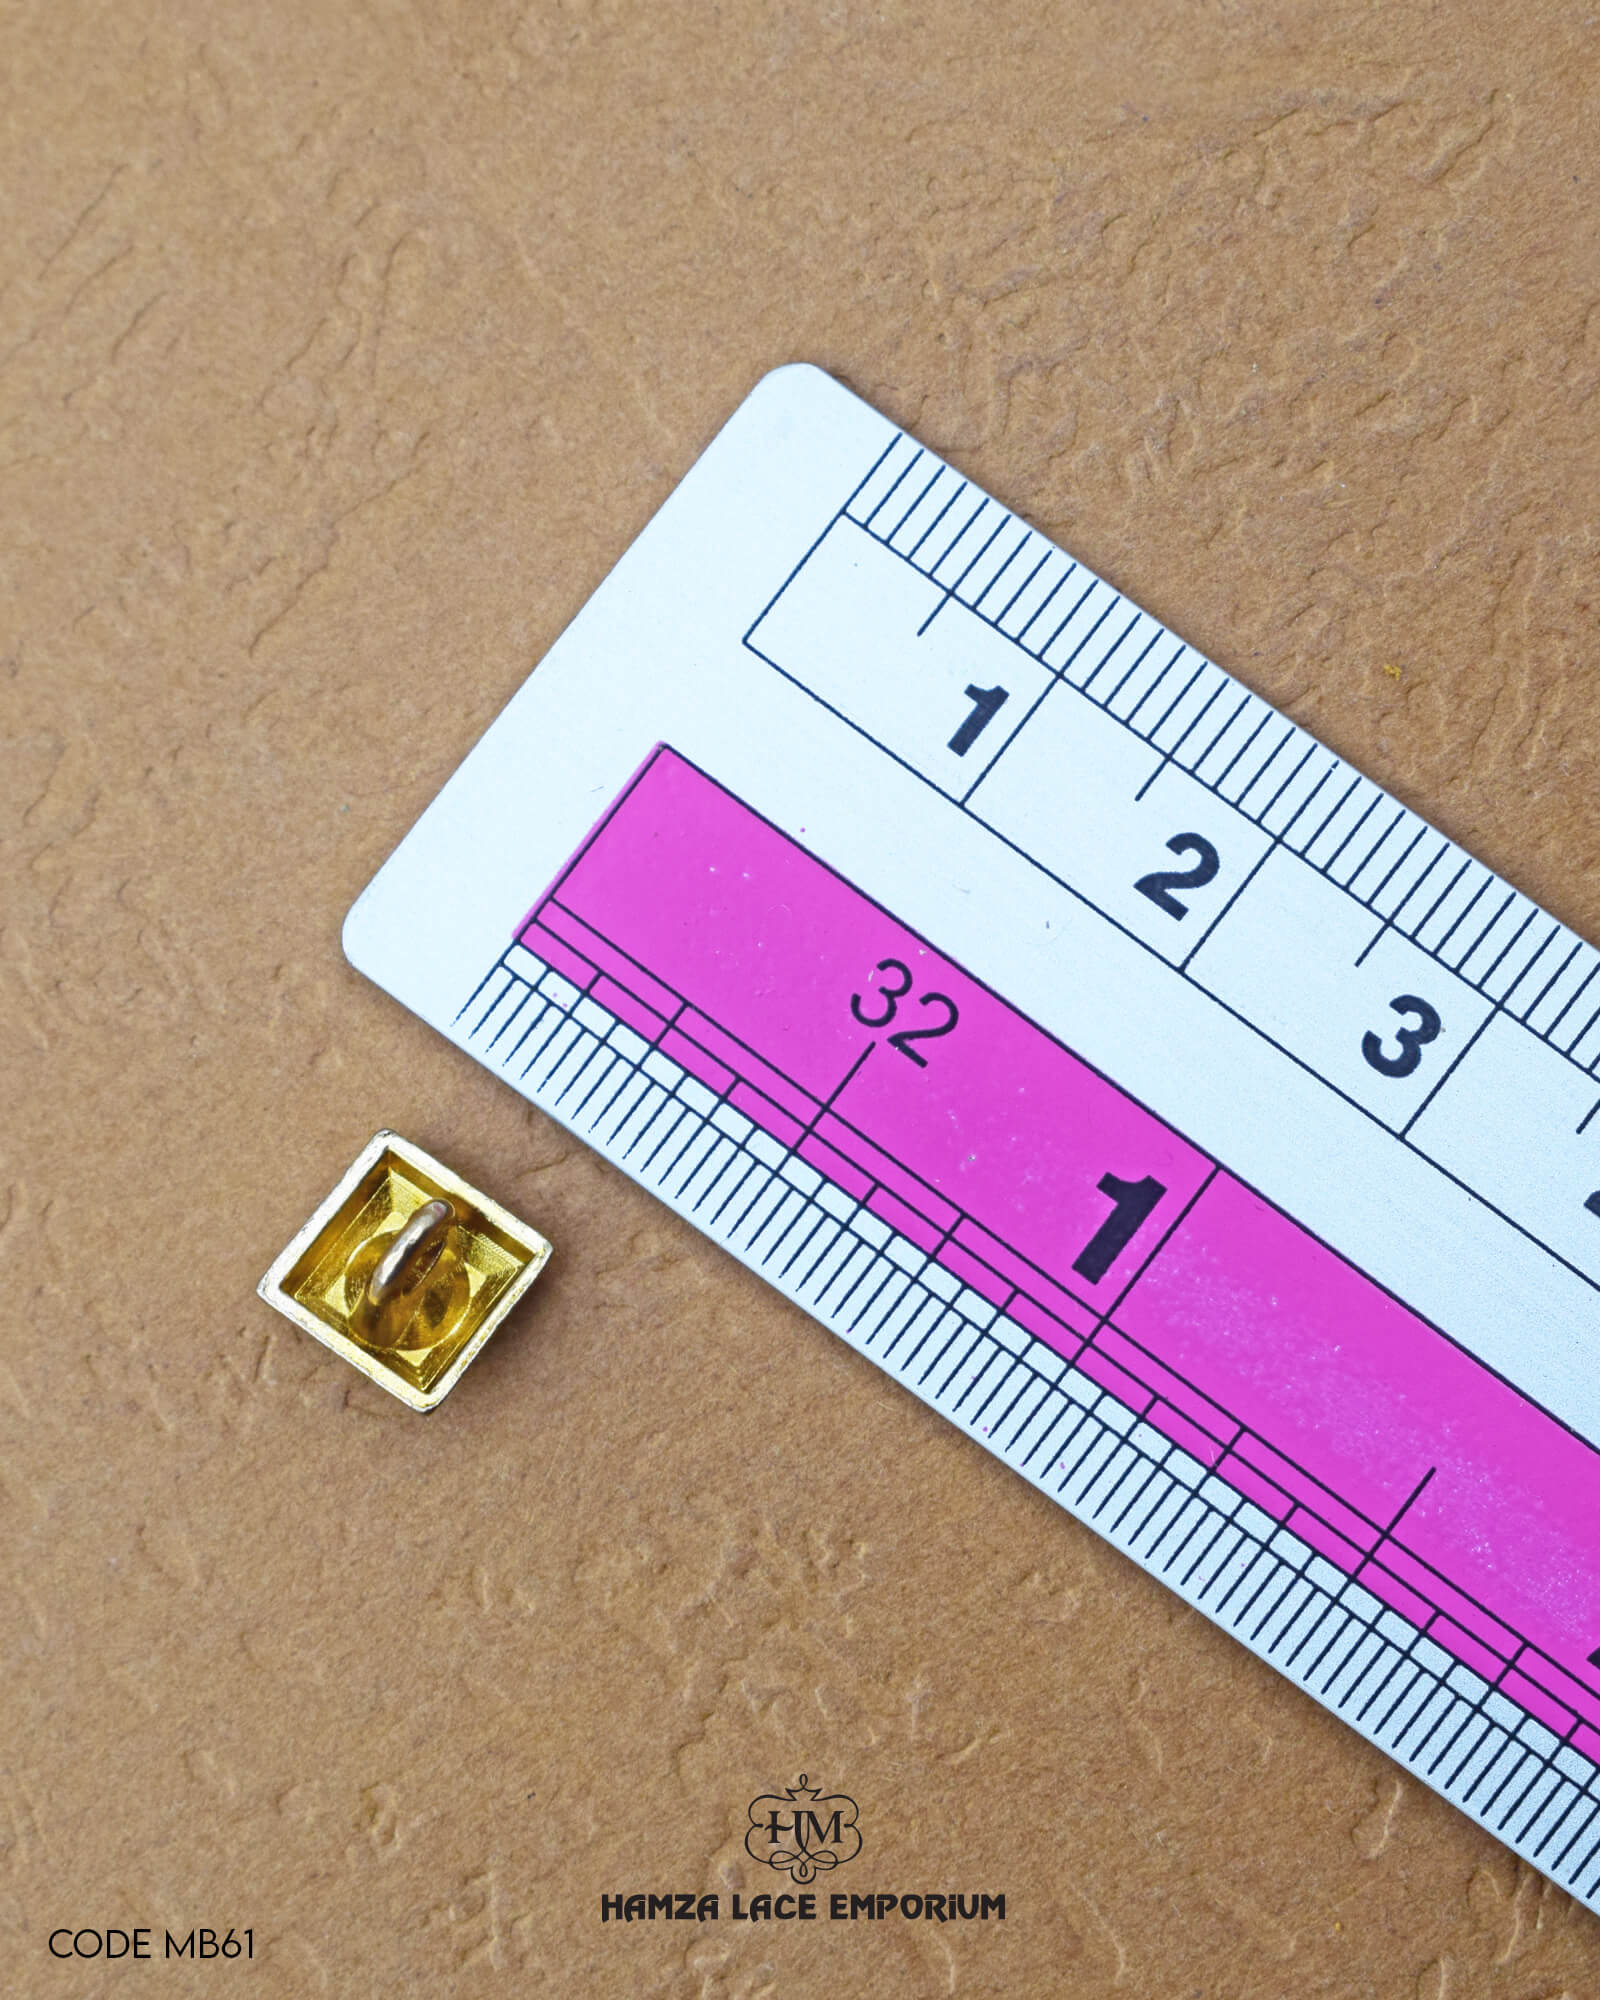 The size of the 'Golden Metal Button MB61' is measured by using a ruler